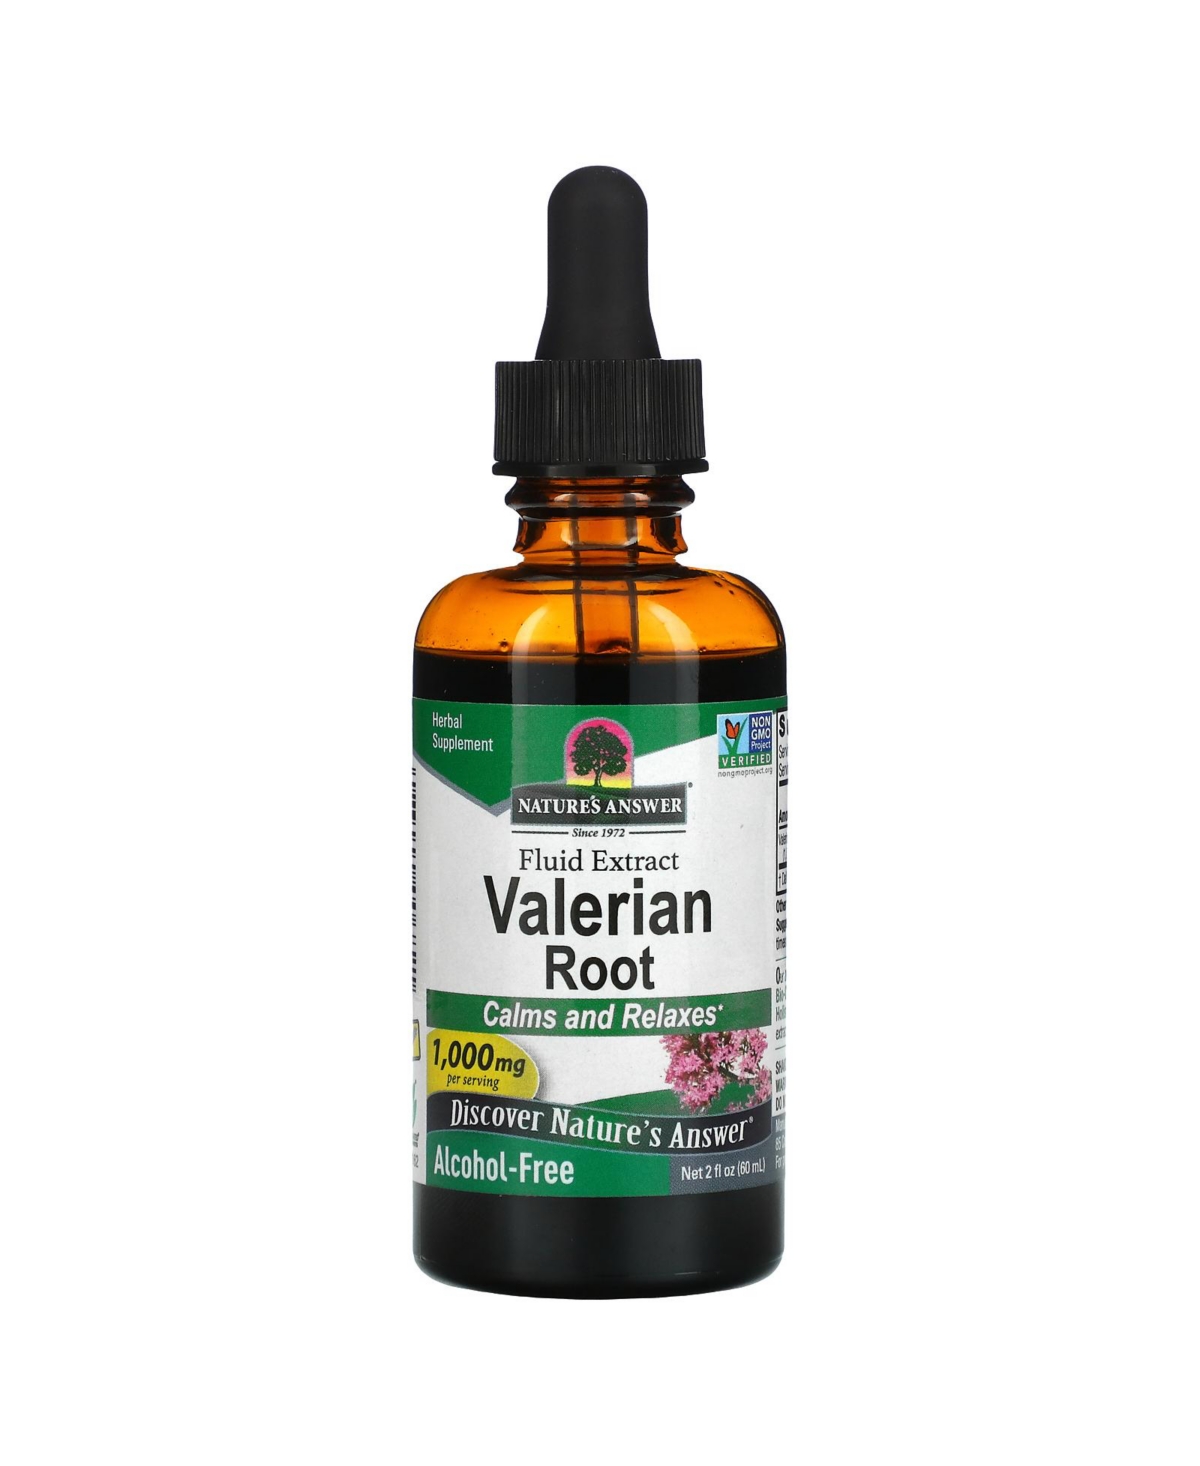 Valerian Fluid Extract Alcohol-Free 1 000 mg - 2 fl oz (60 ml) - Assorted Pre-pack (See Table